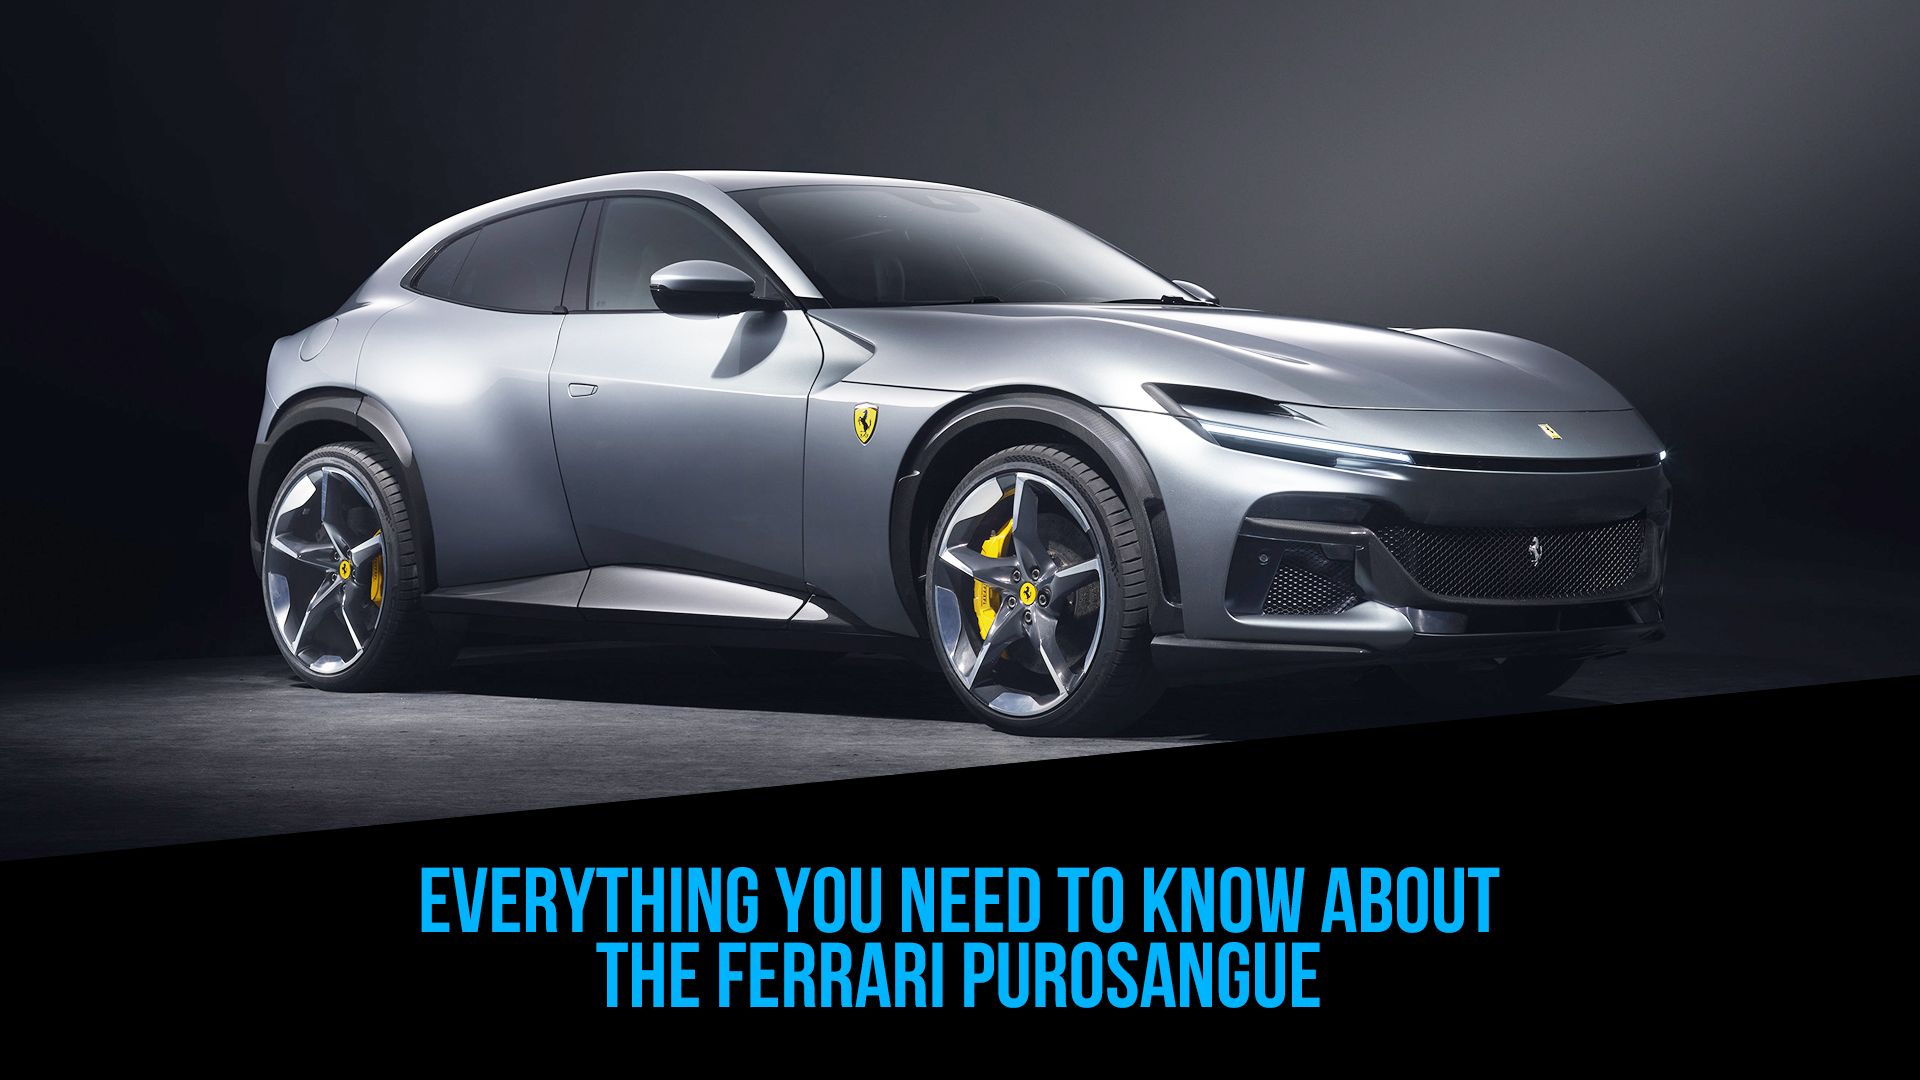 10 Things You Should Know About The Ferrari Purosangue